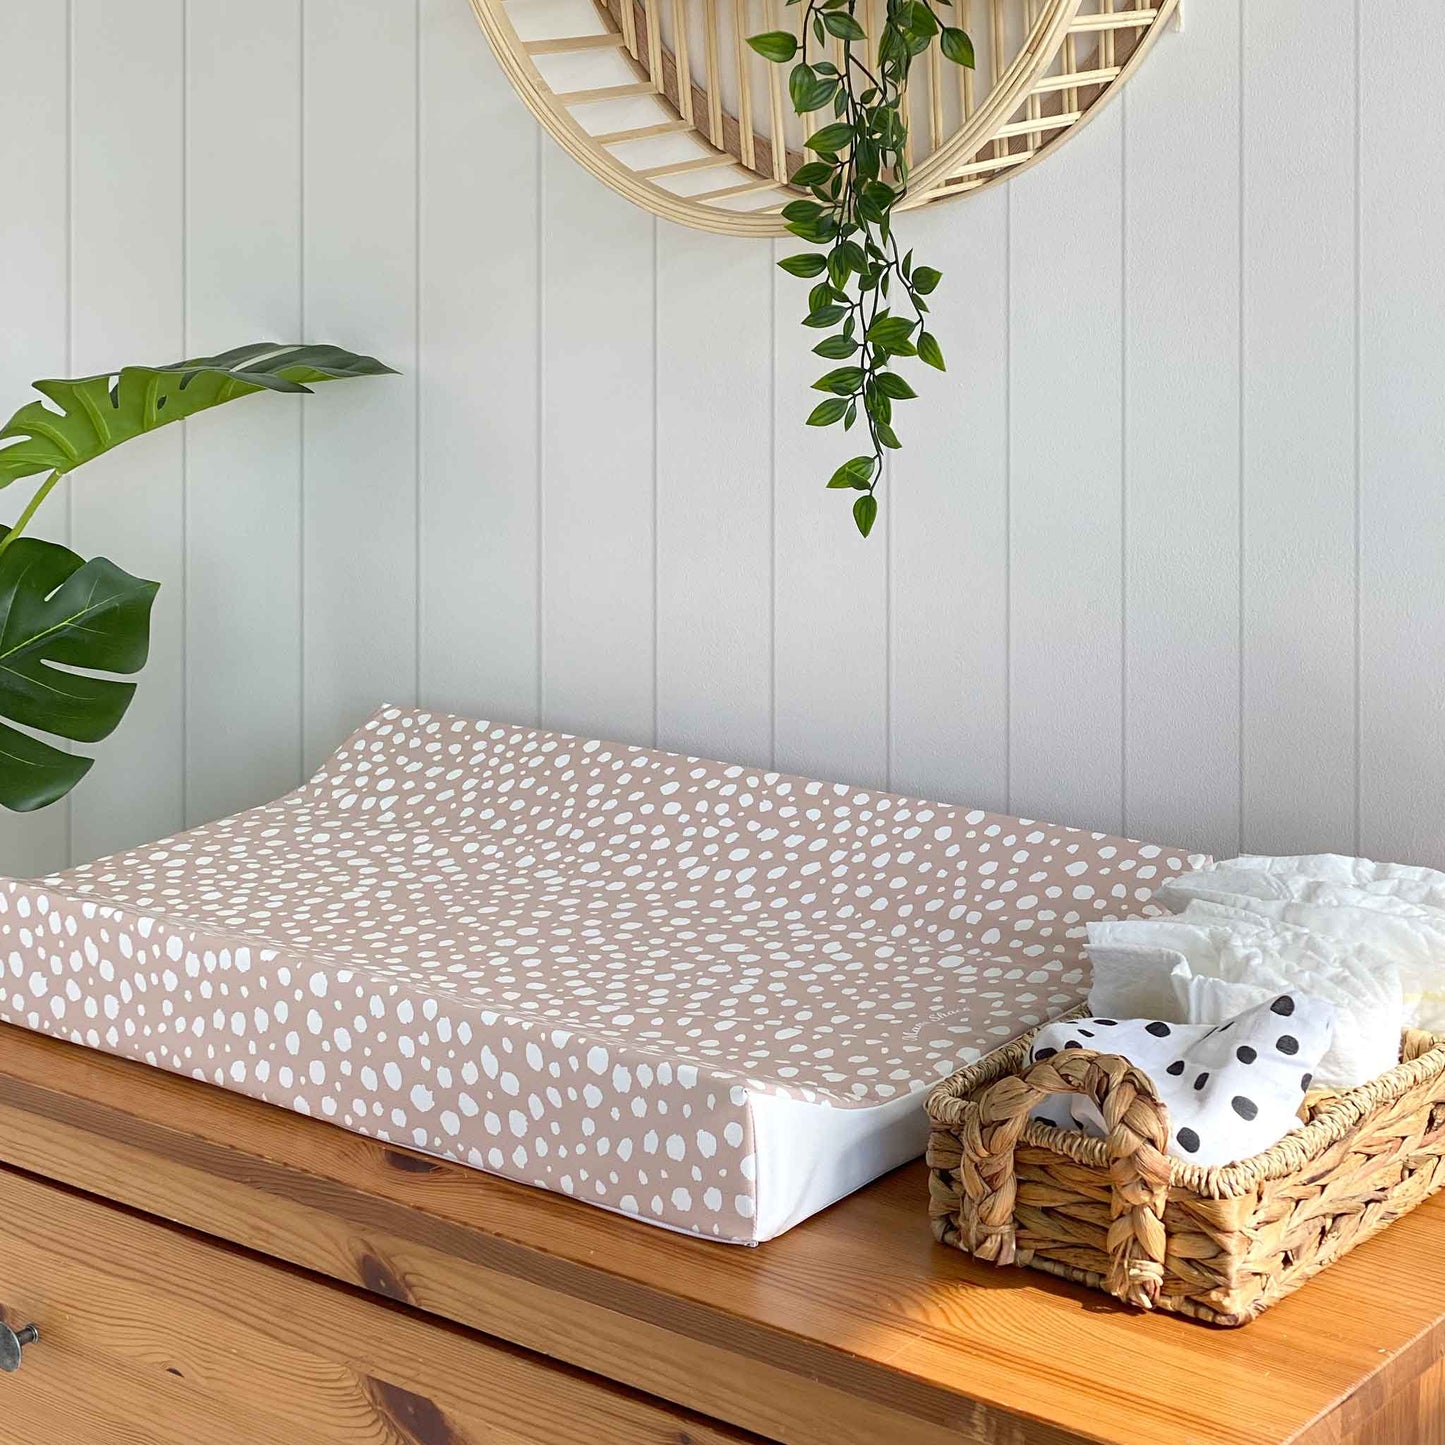 Mama Shack Anti Roll Changing Mat by Mama Shack in the Spotty Rose Print is a lovely addition to any nursery 